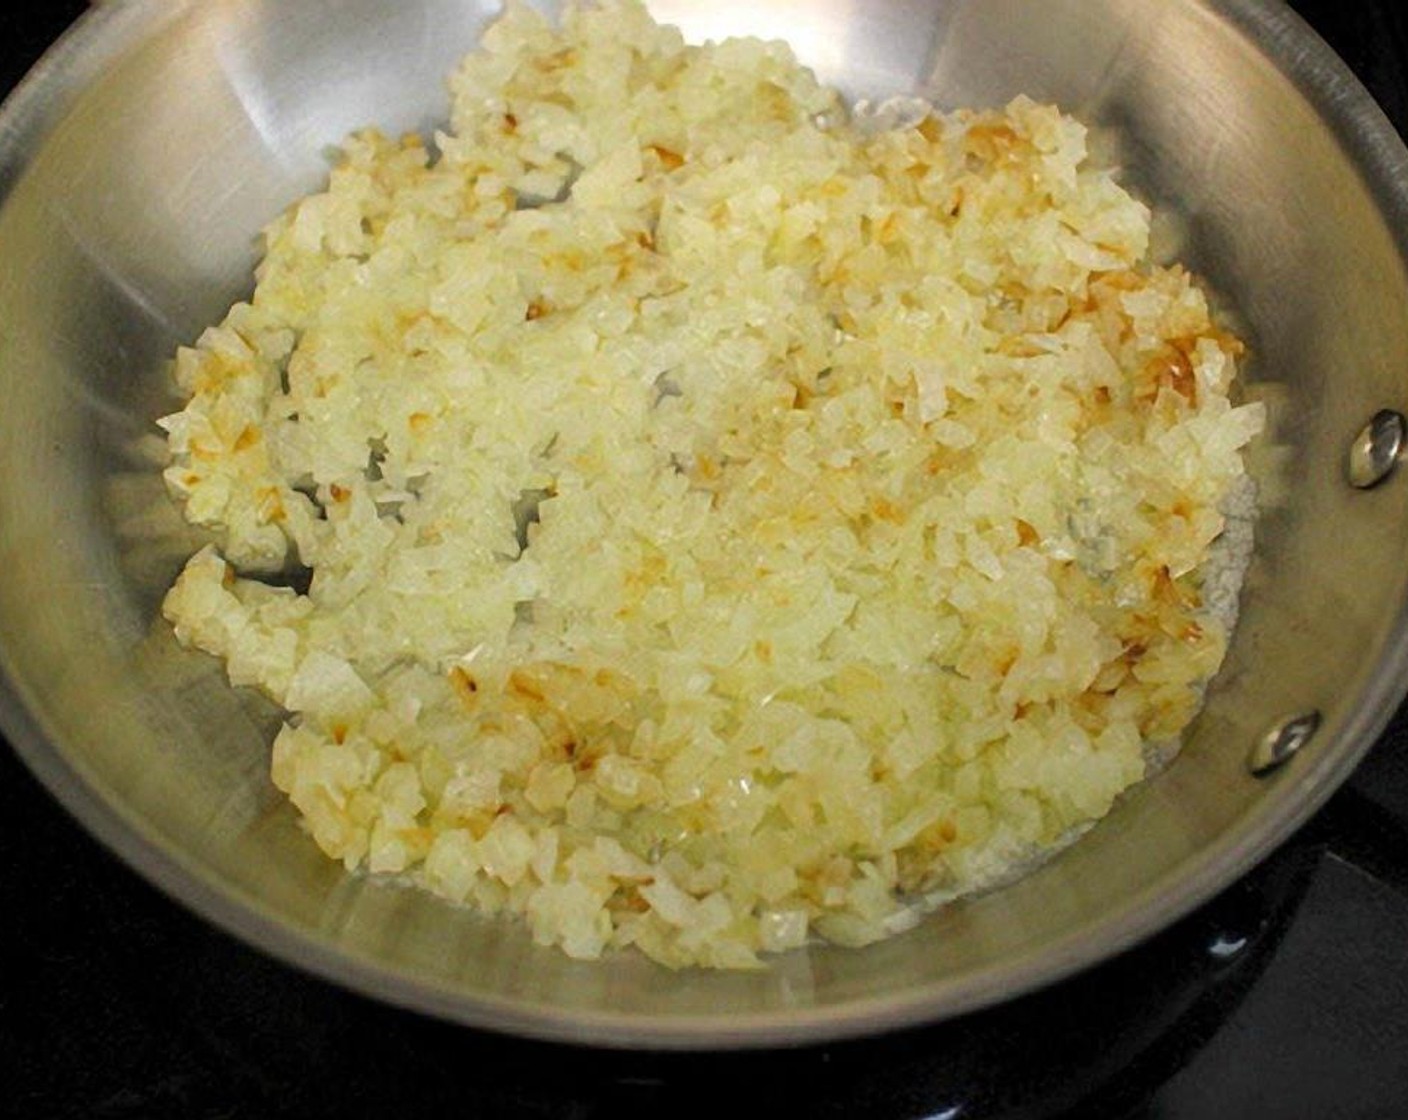 step 2 Melt the Butter (1 1/2 Tbsp) in a skillet. Add the Onions (2), season with Salt (to taste) and Ground Black Pepper (to taste), cover and cook on medium heat until tender, about 5 minutes.